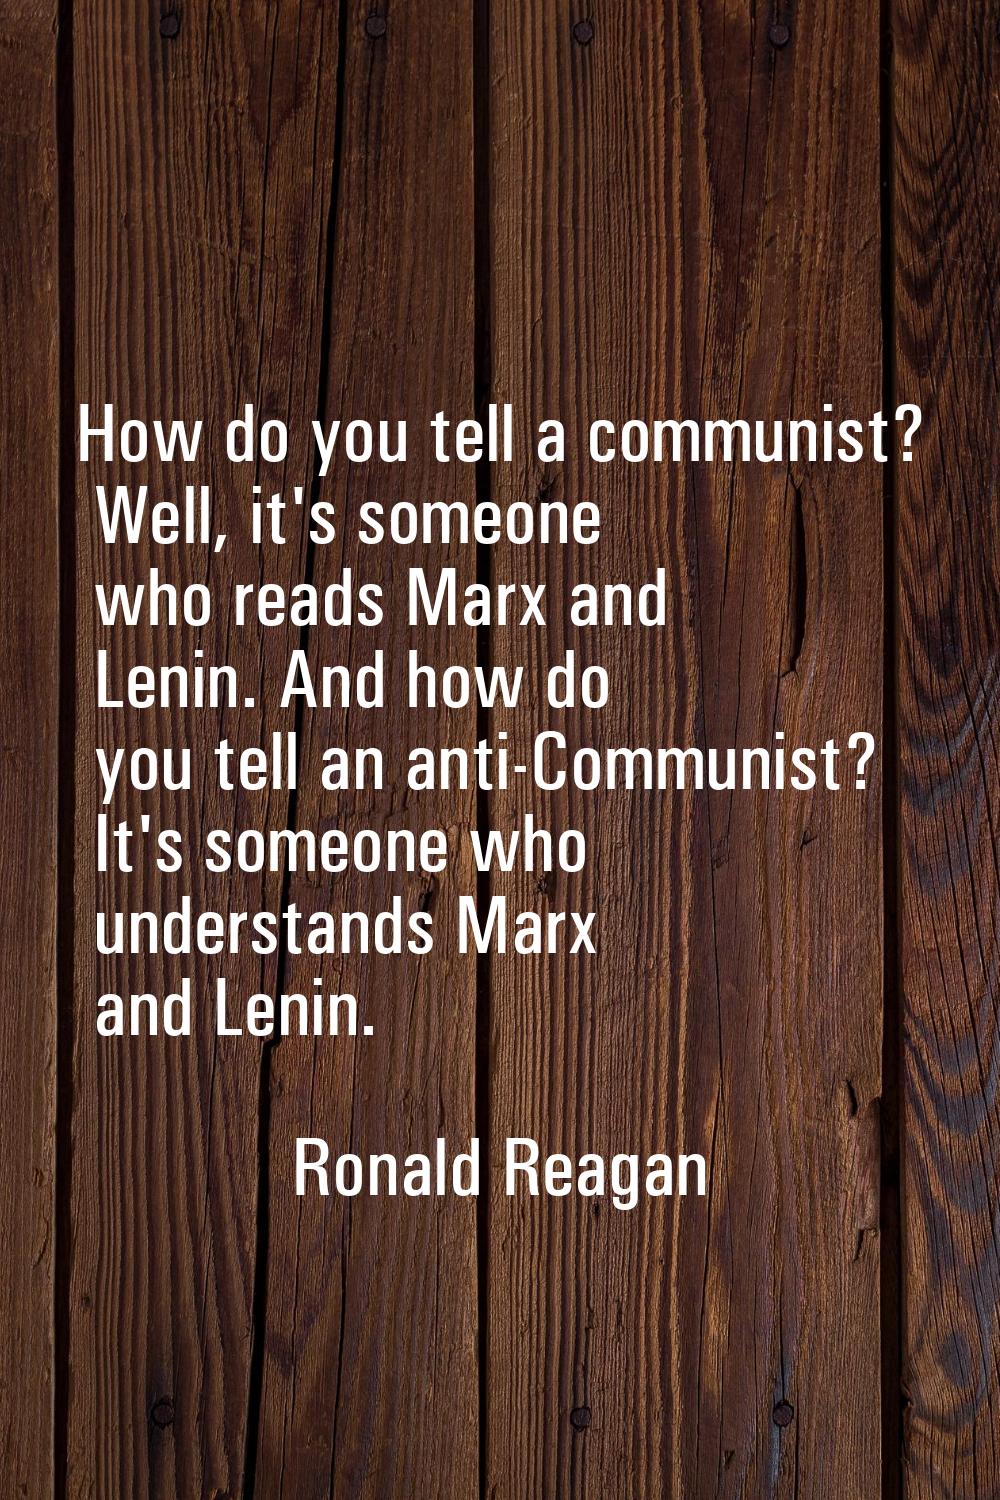 How do you tell a communist? Well, it's someone who reads Marx and Lenin. And how do you tell an an